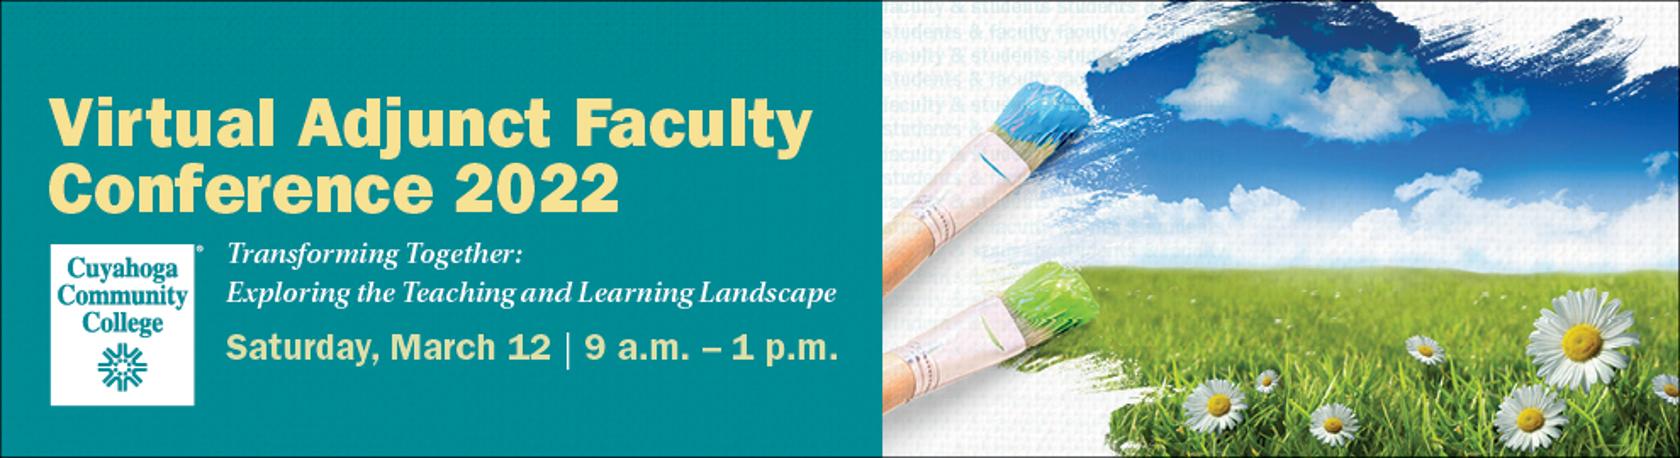 2022 adjunct faculty conference banner